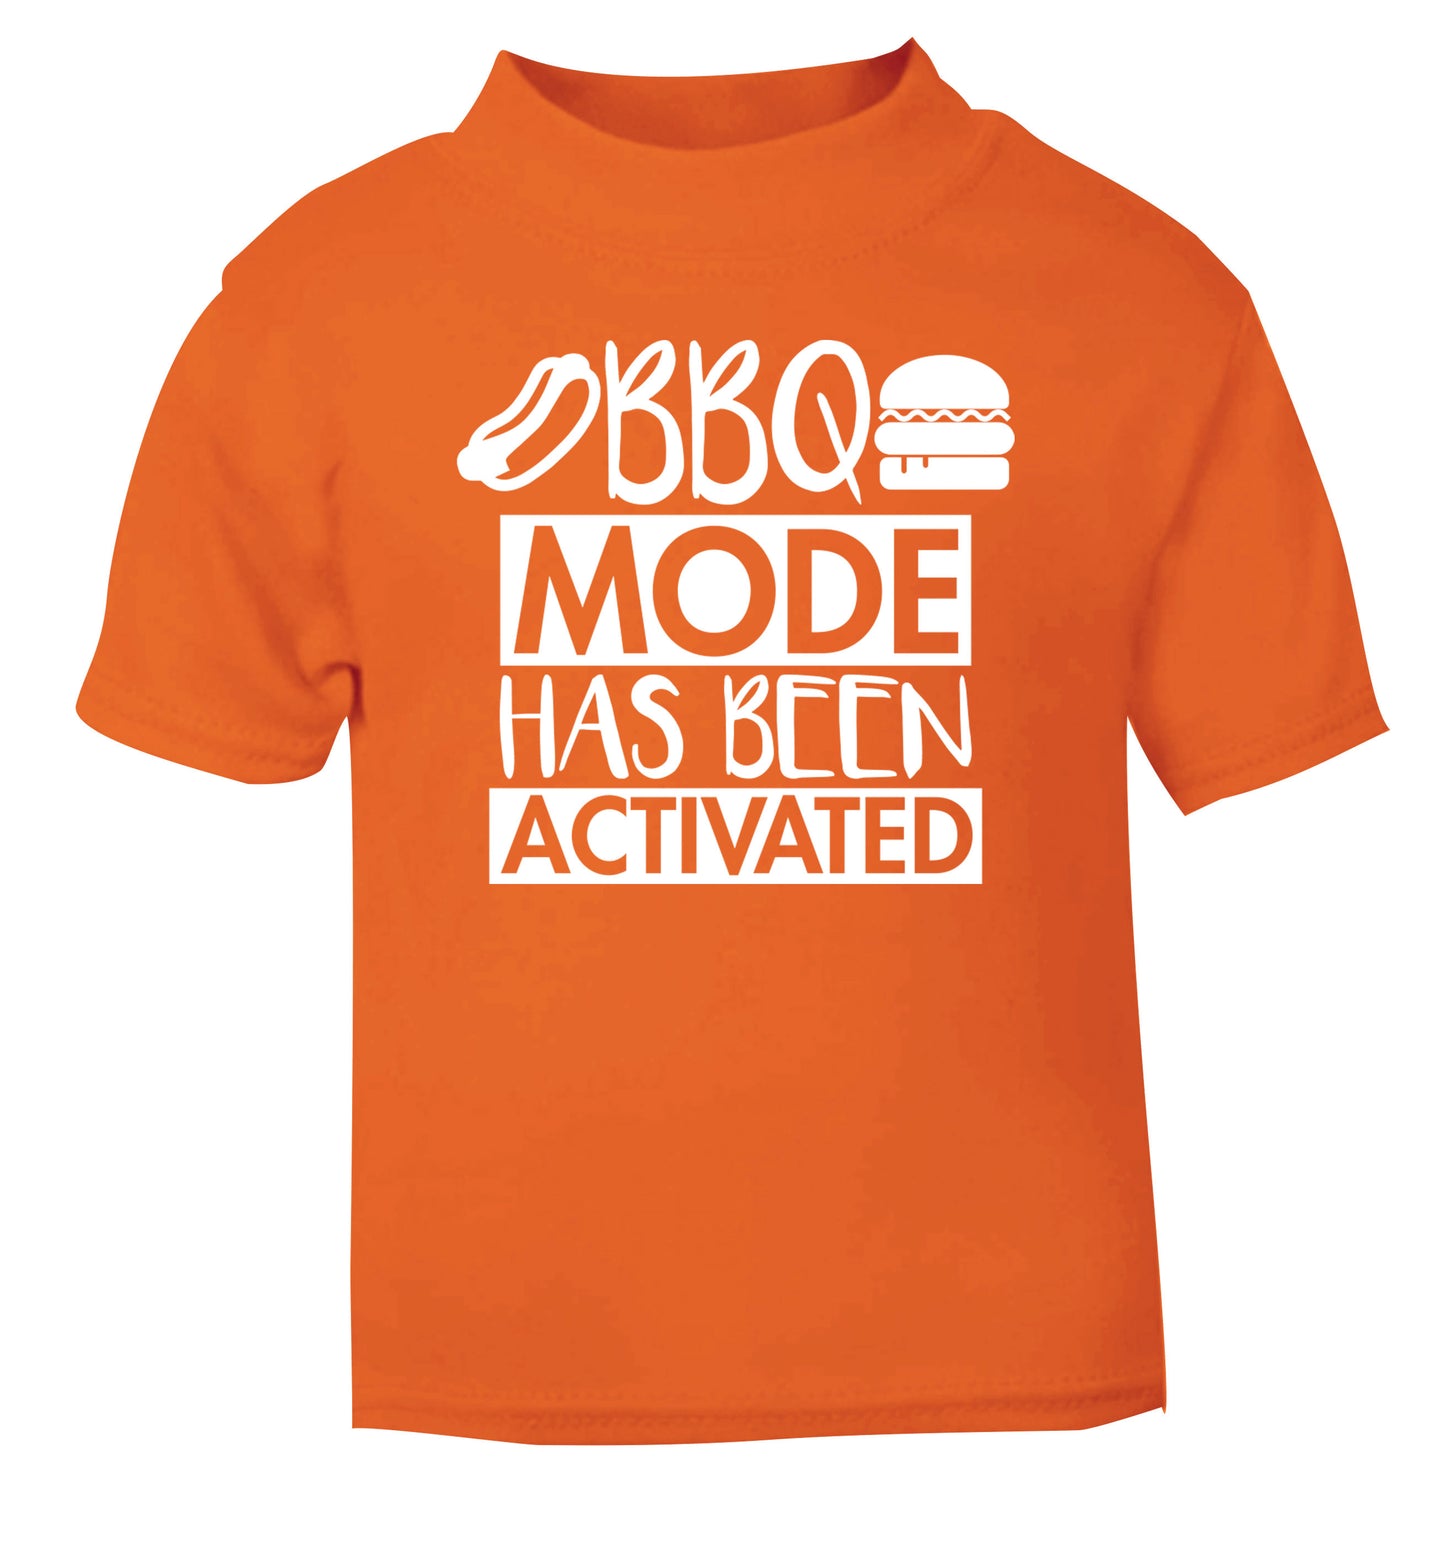 Bbq mode has been activated orange Baby Toddler Tshirt 2 Years